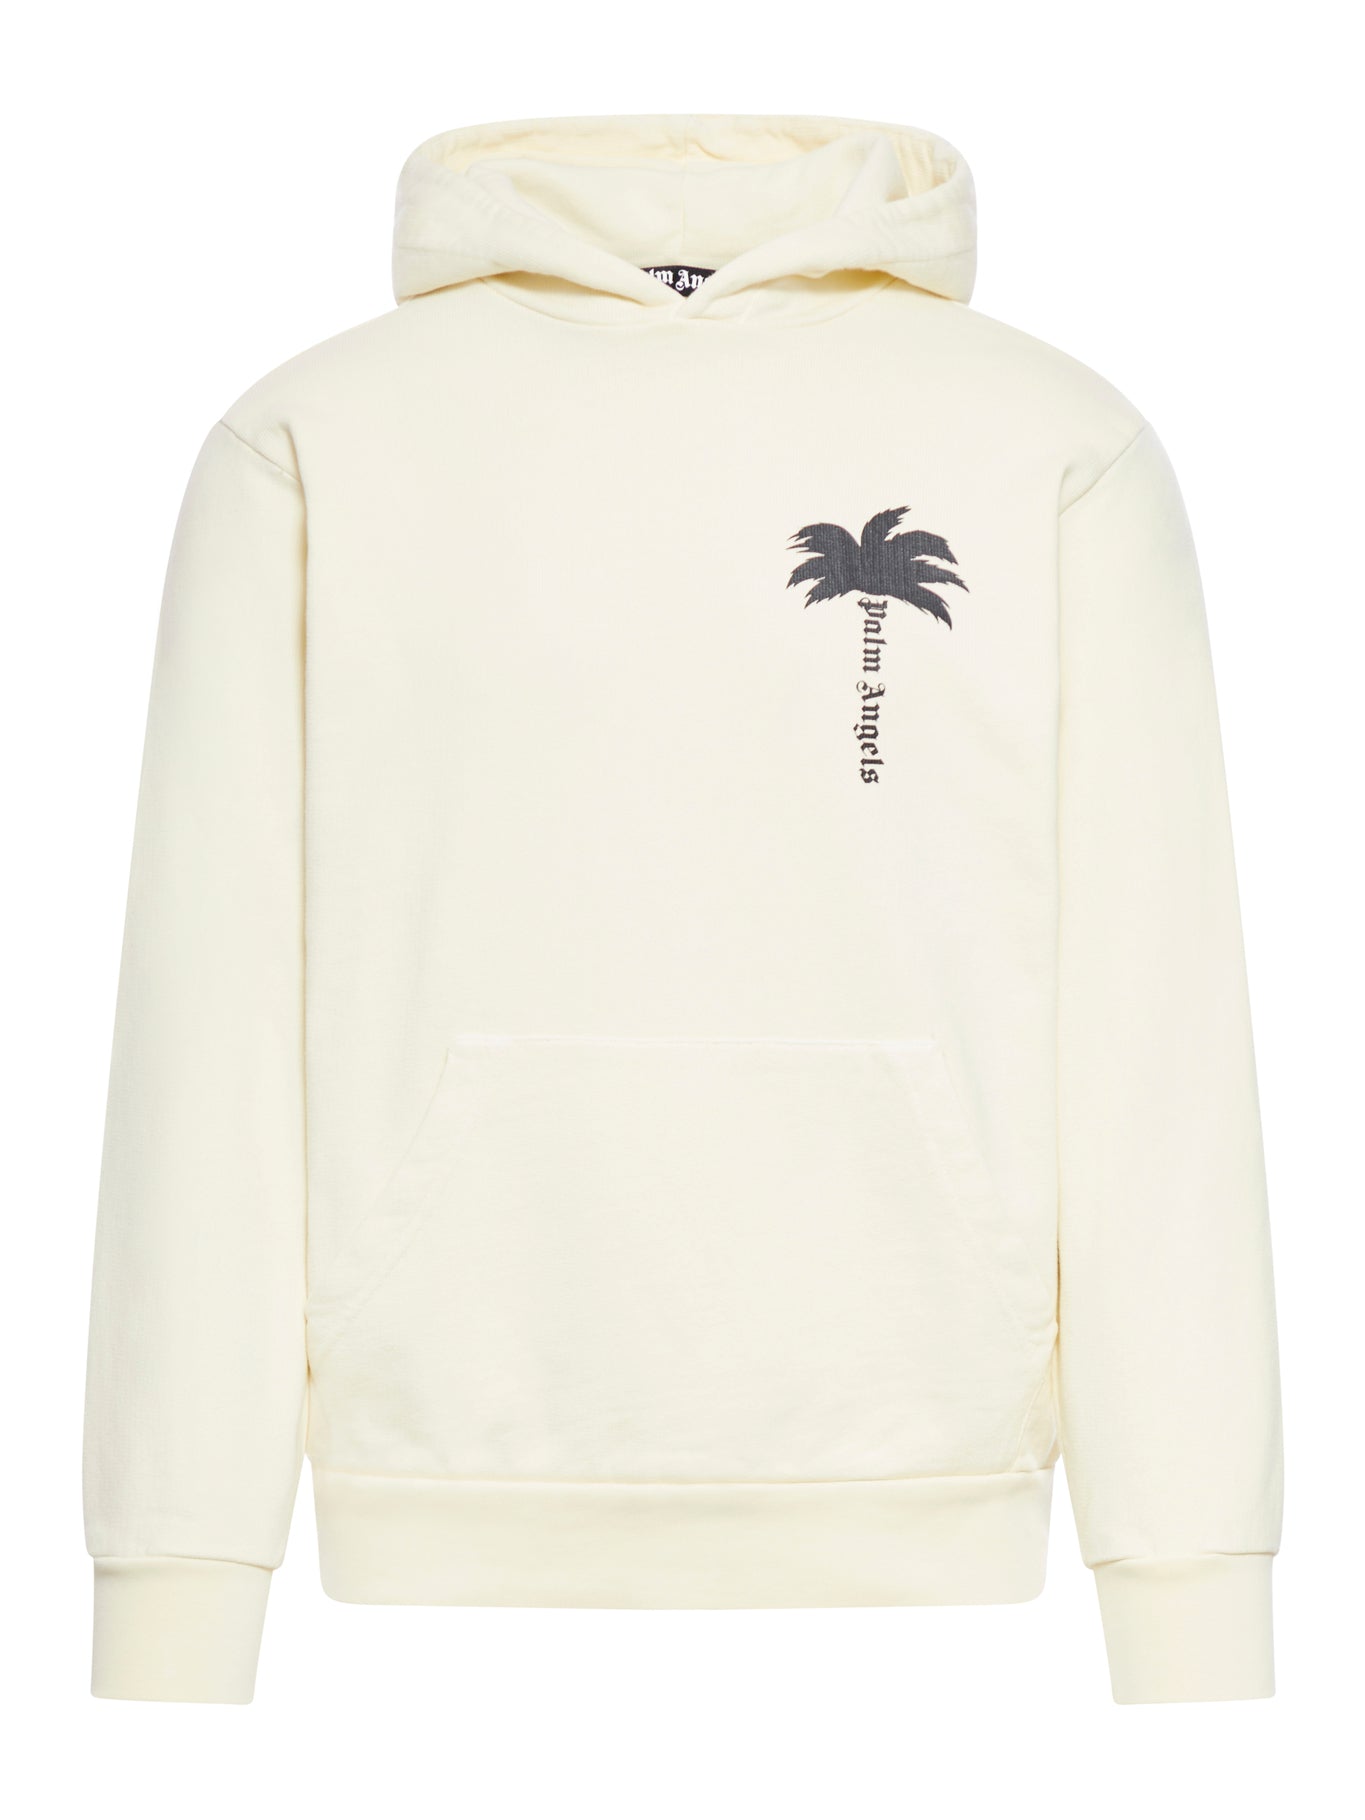 HOODIE WITH LOGO